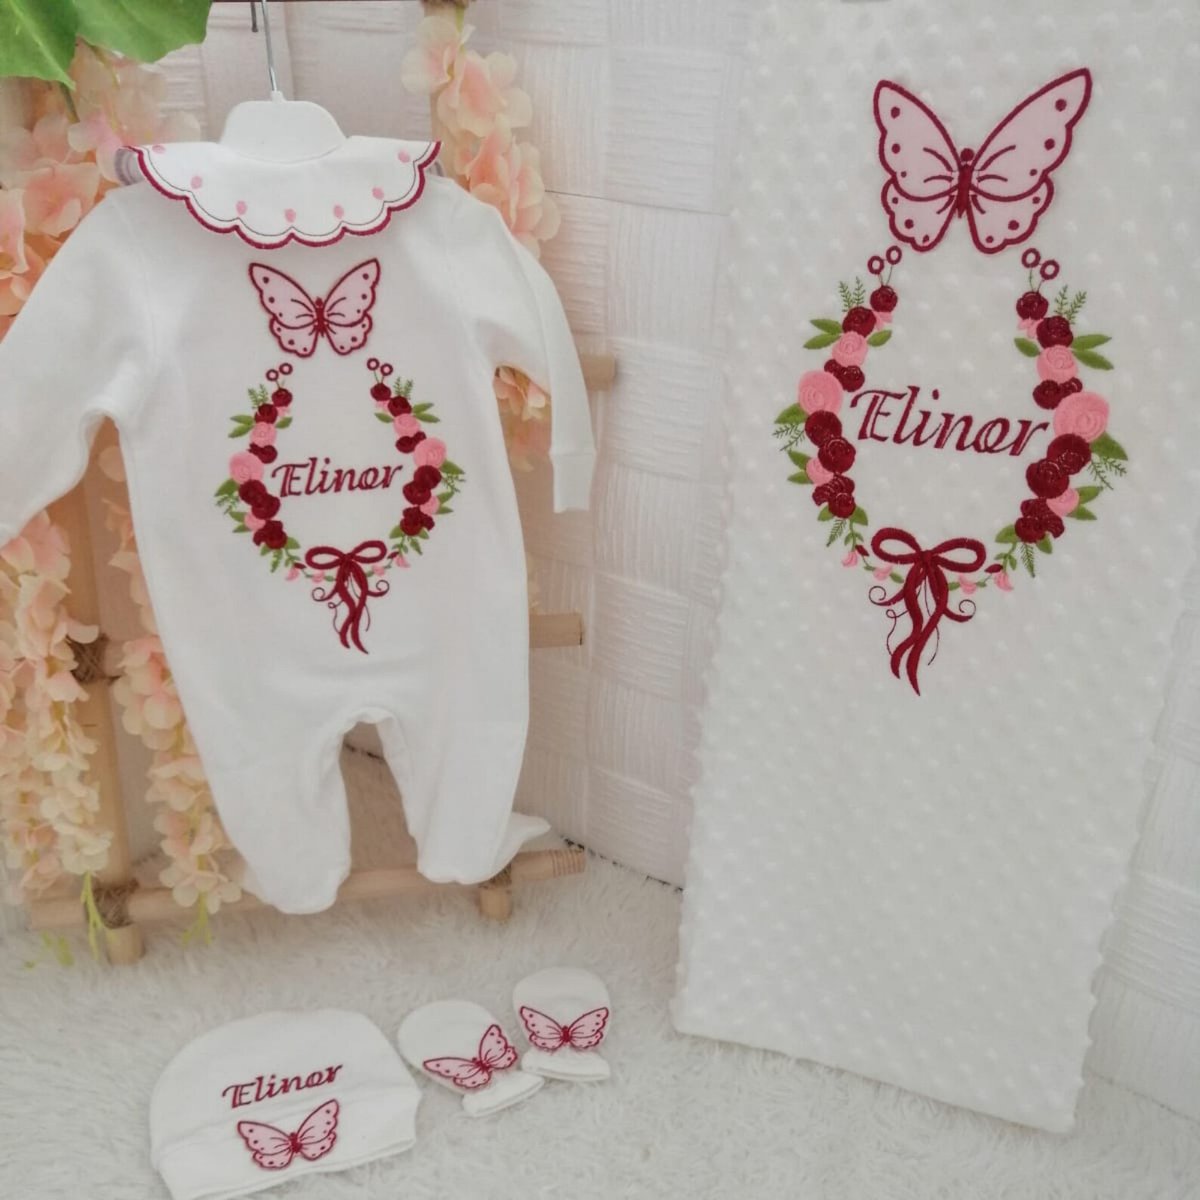 Custom Name Embroidered Newborn Hospital Outfit
Etsy Link : t.ly/4bwo5

#BabyRomper #ElephantRomper #CustomRomper #EmbroideredRomper #AnimalBabyRomper #NameRomper #ComingHomeOutfit #HospitalOutfit #NewbornOutfit #BabyGirlOutfit #BabyGirlSet #BabyGirlGift #NewbornGift